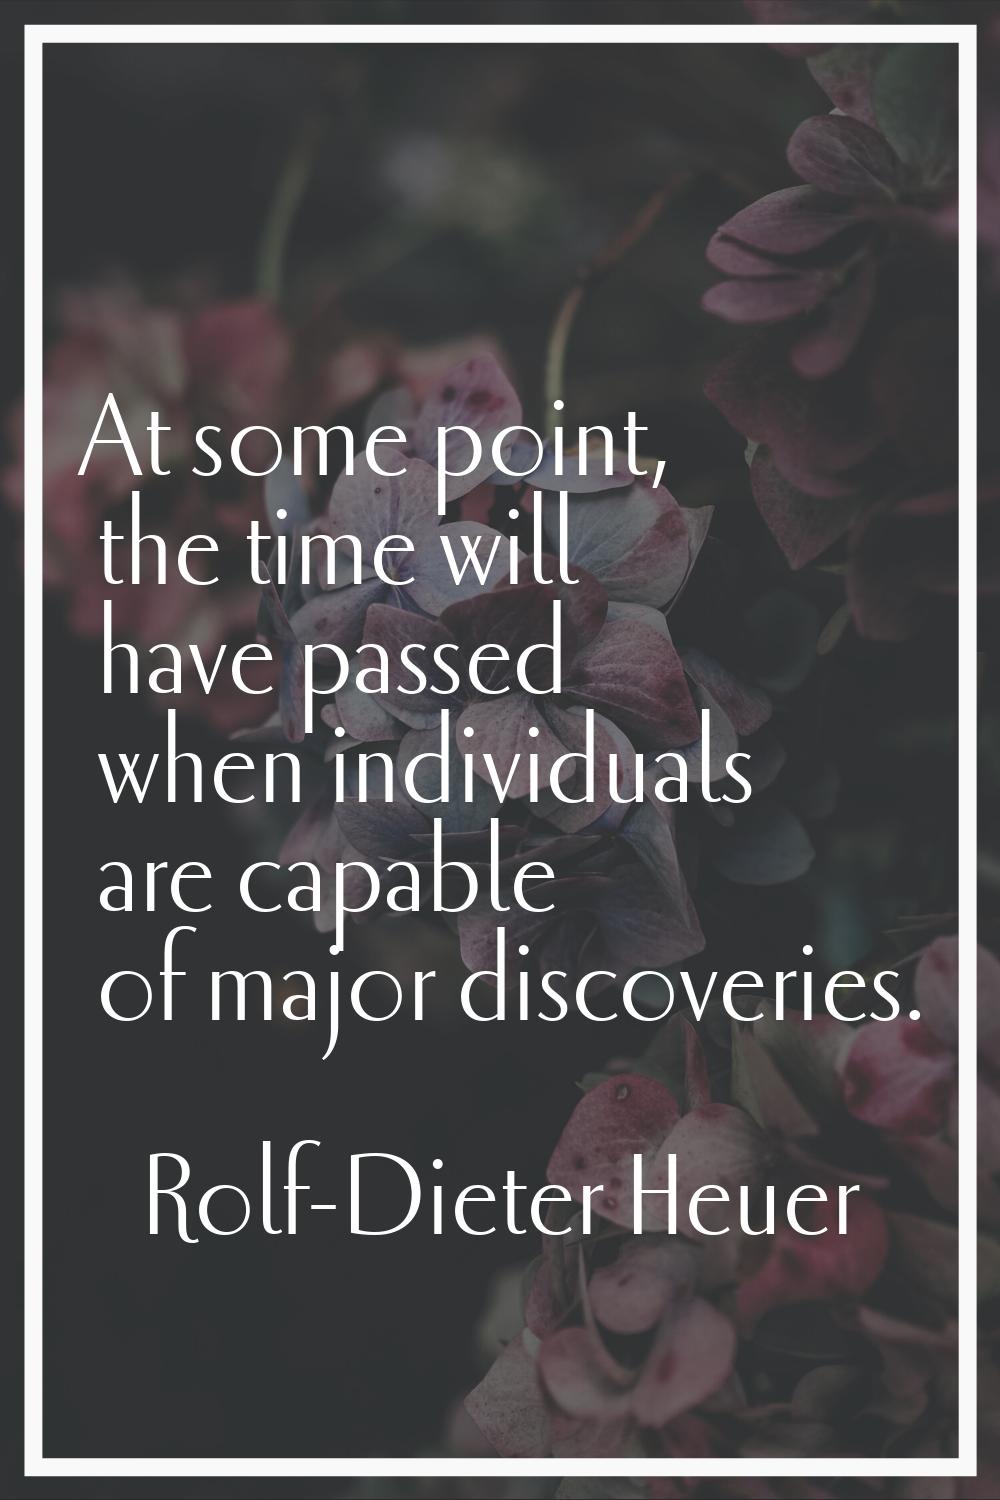 At some point, the time will have passed when individuals are capable of major discoveries.